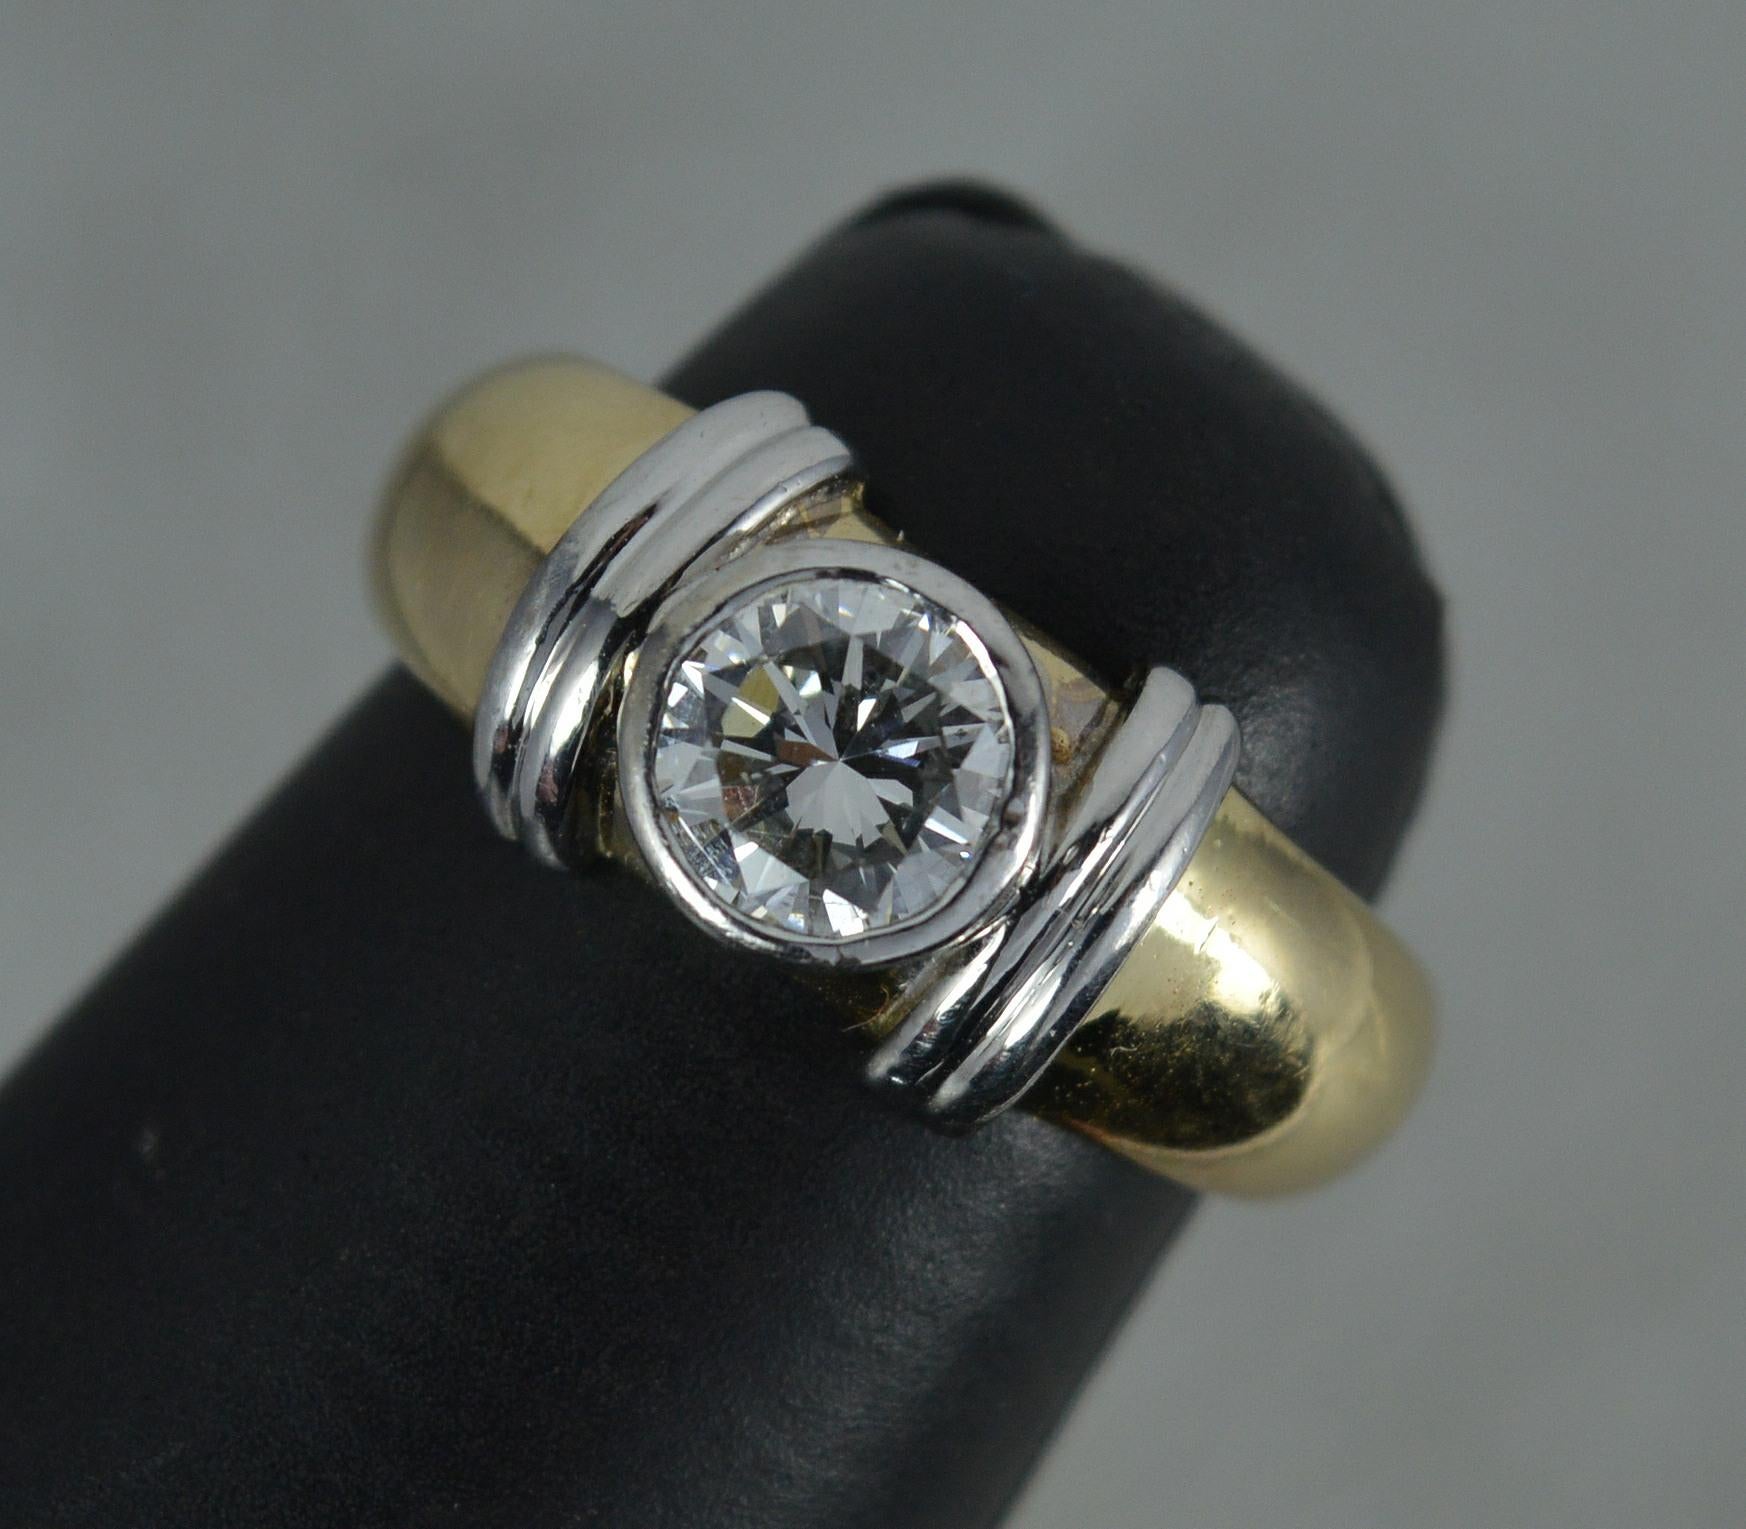 A fine 18 carat gold and diamond ring.
18 carat yelow gold shank with white gold bezel and column shoulder.
The diamond is 5.7mm in diameter and weighs 0.7 carats. Natural, round brilliant cut. Very bright and sparkly, well cut stone.
Protruding